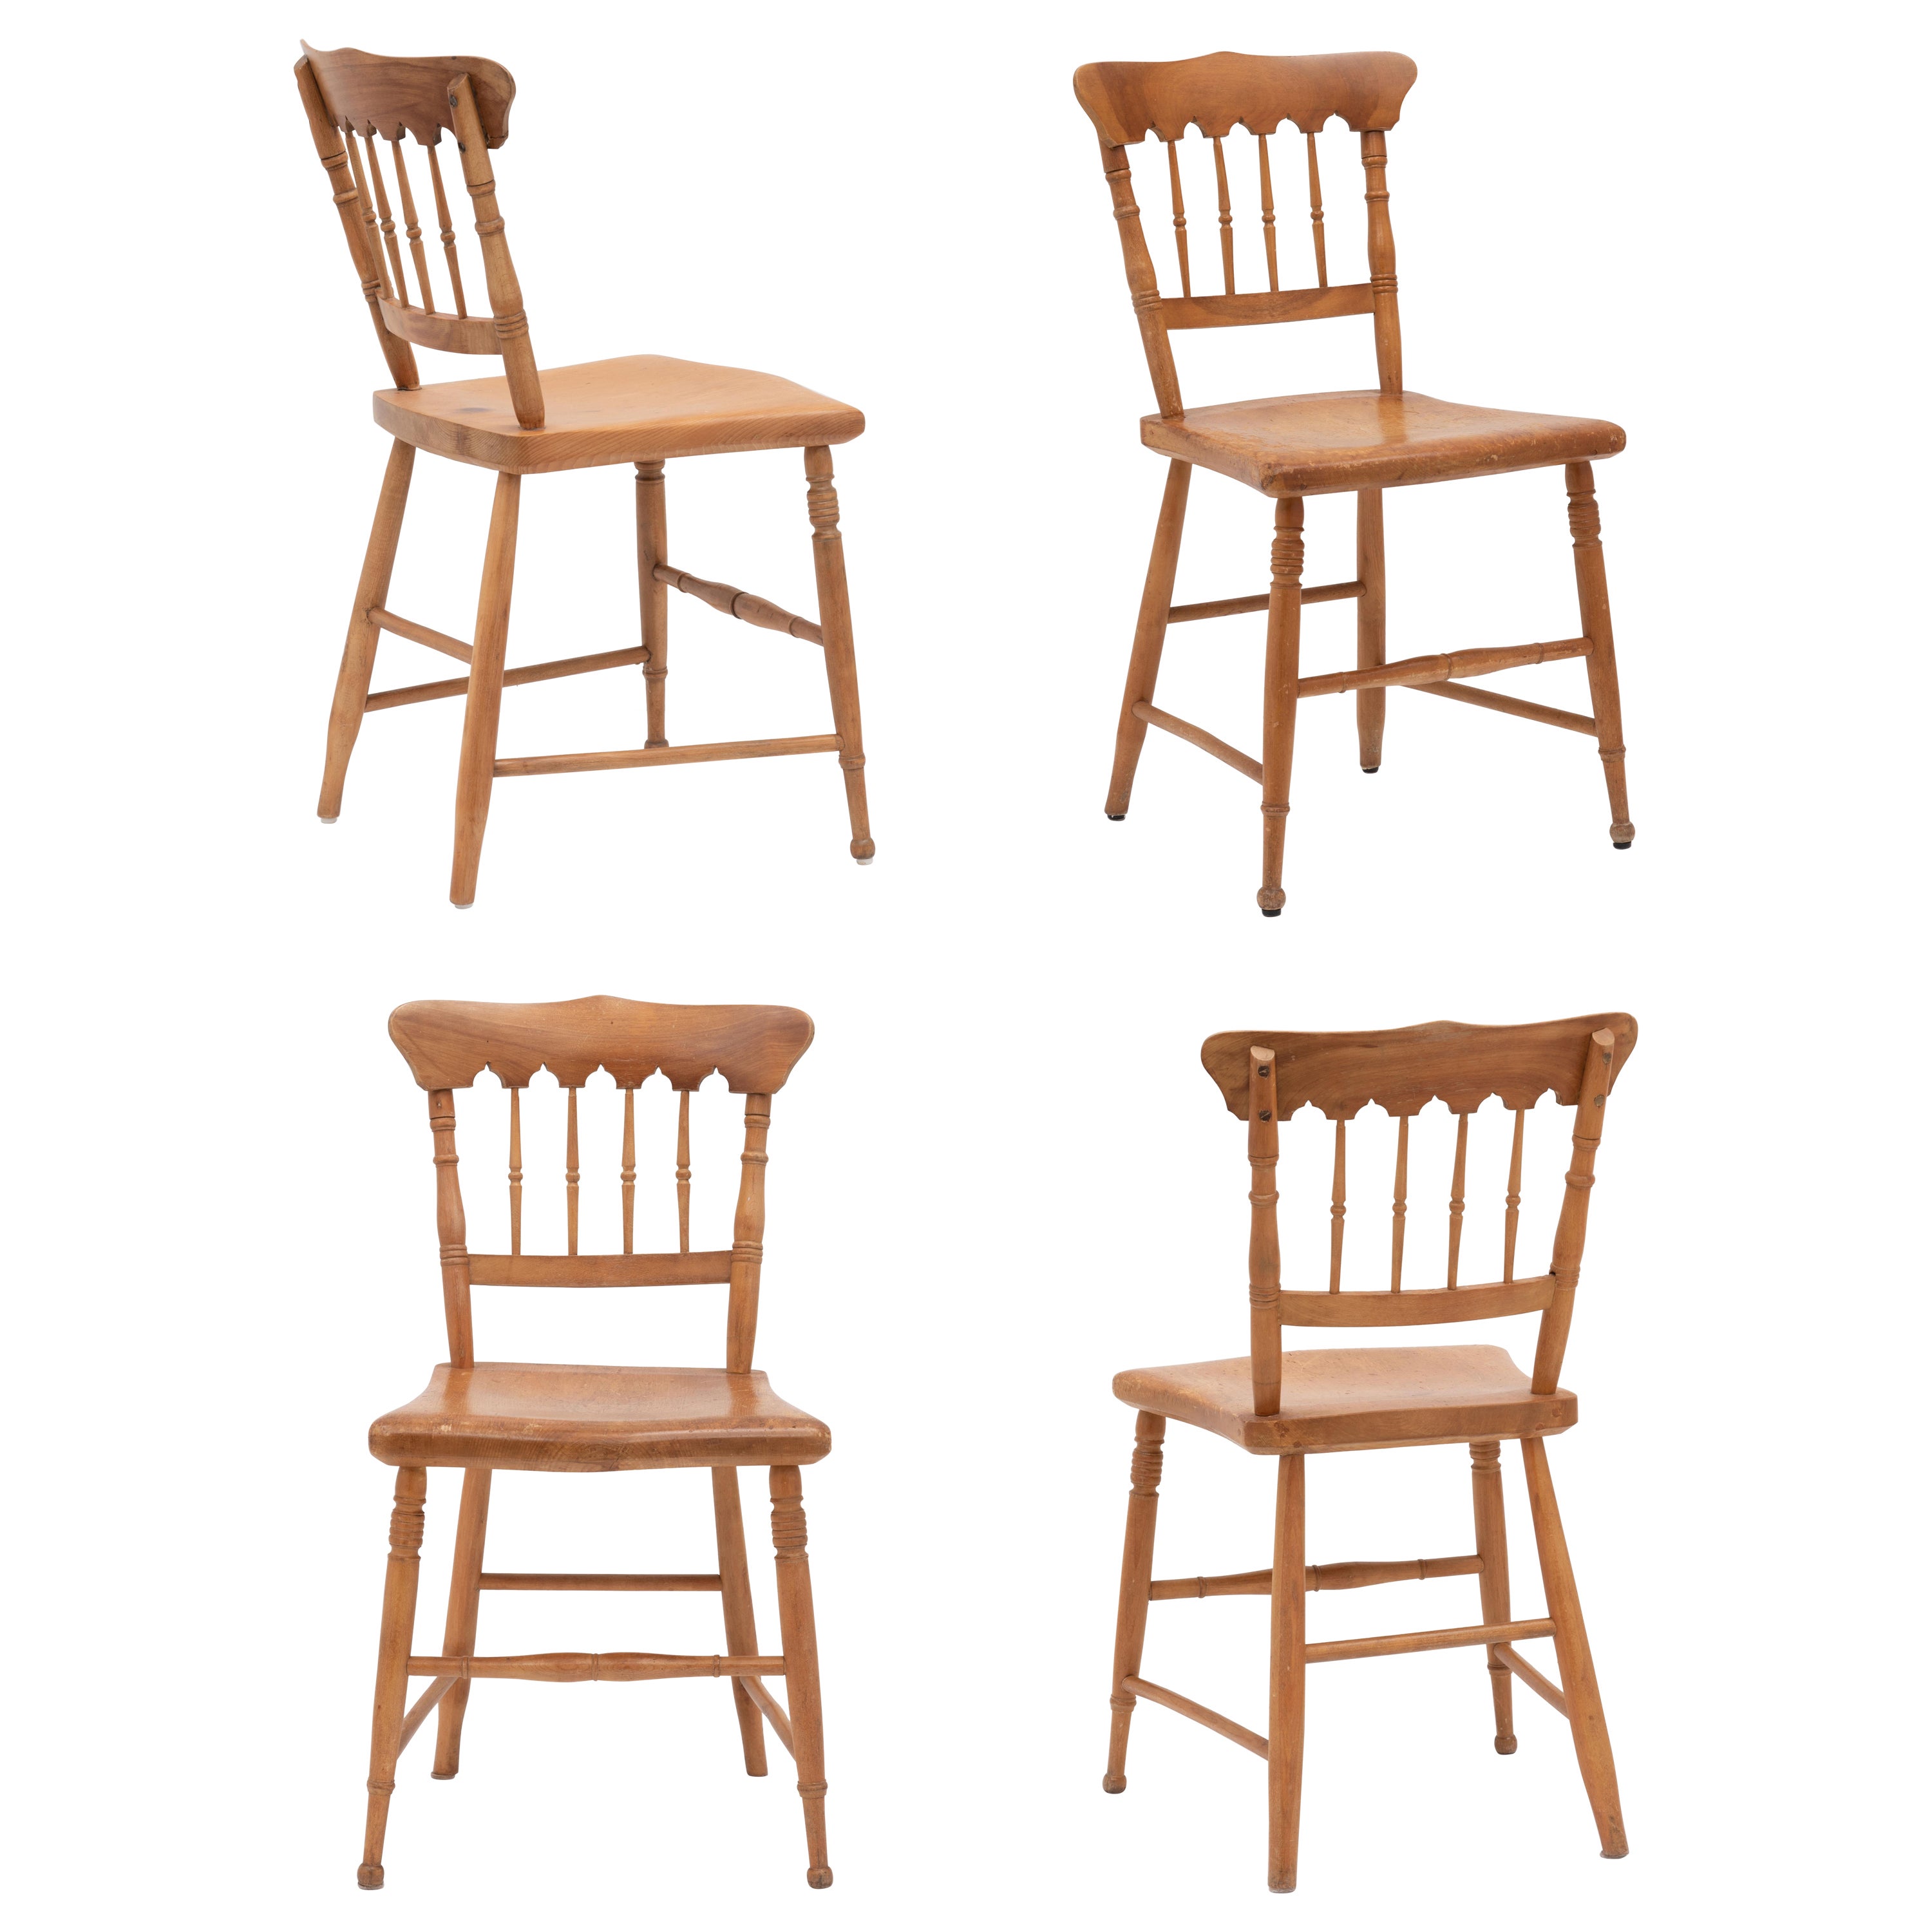 English Scrubbed Pine Plank Seat Dining Chairs Farmhouse Cottage, a Set of Four For Sale